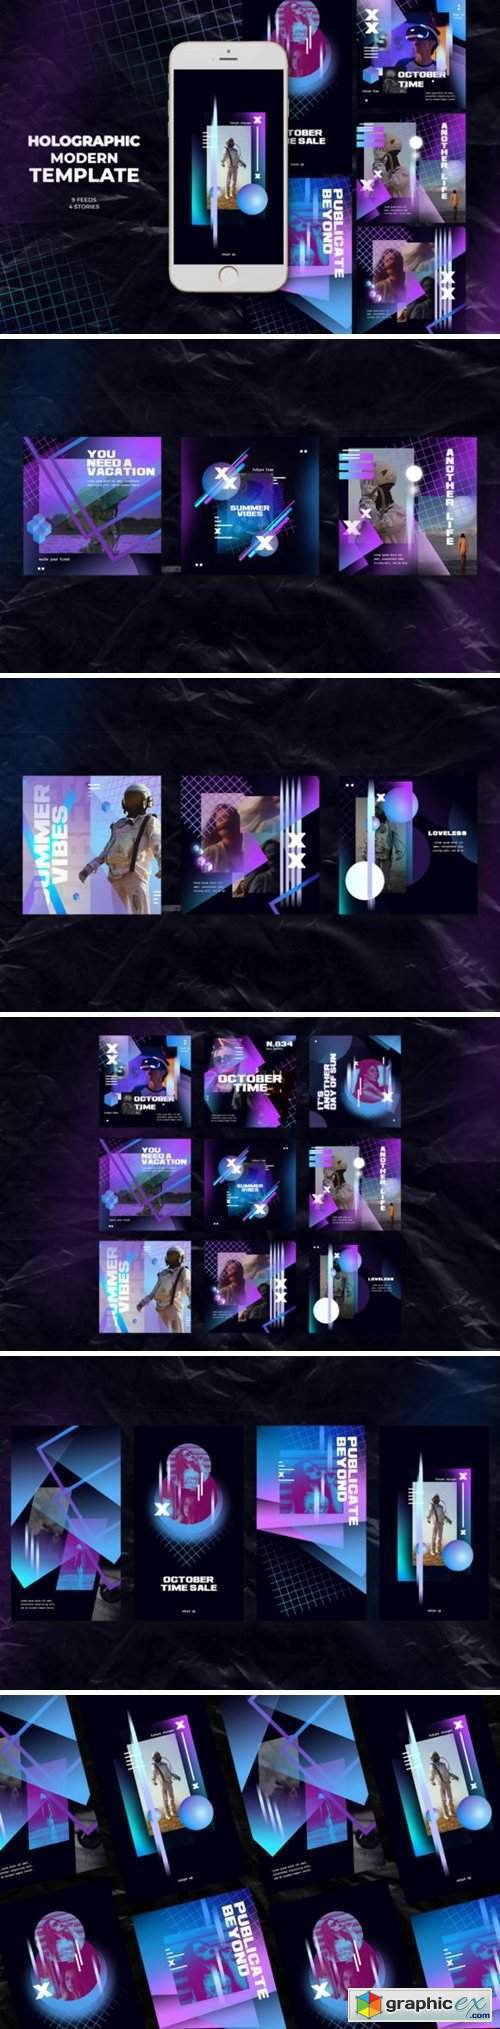 Holographic Modern Instagram Templates